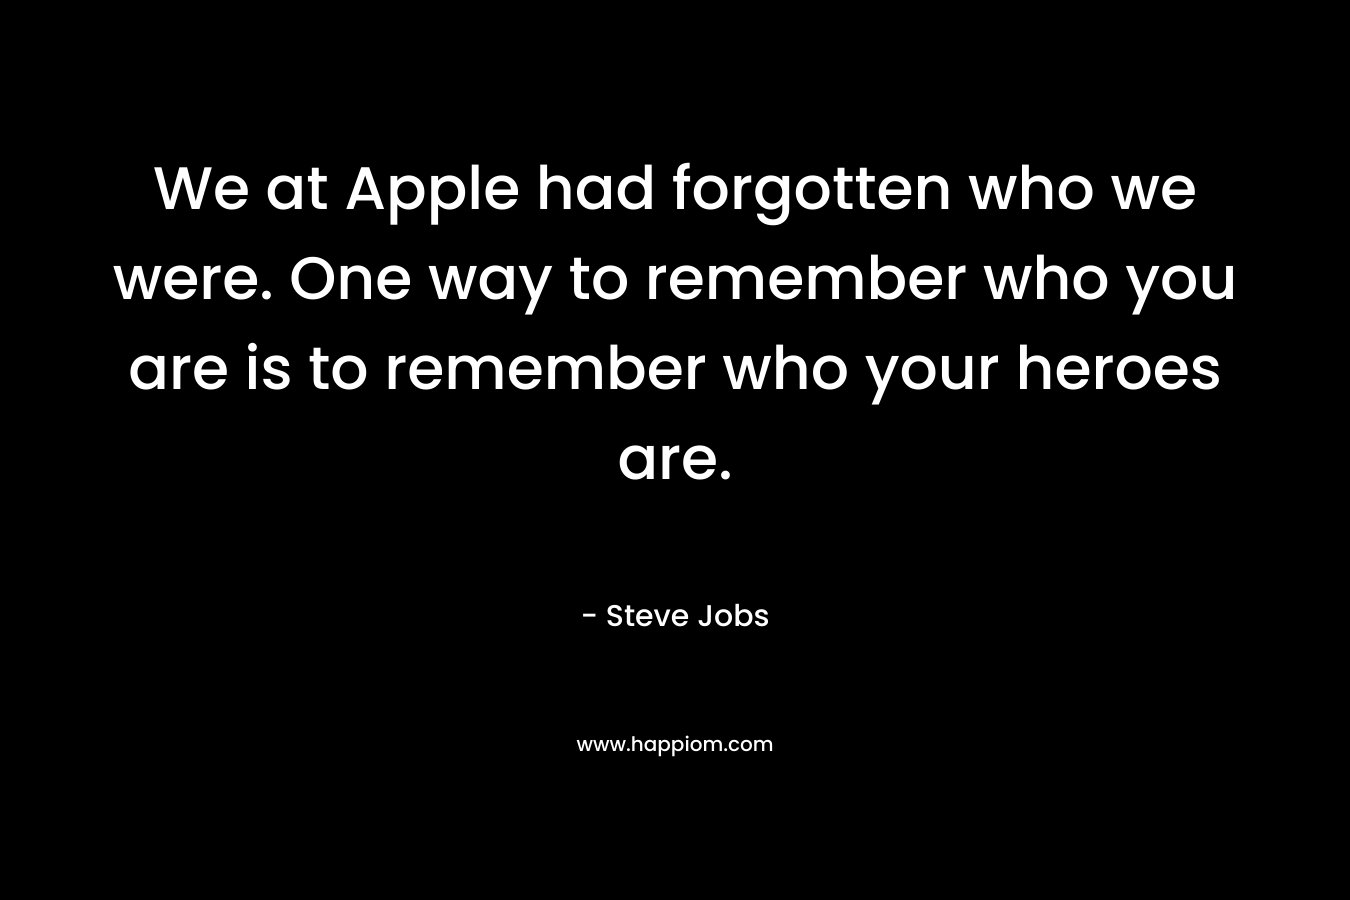 We at Apple had forgotten who we were. One way to remember who you are is to remember who your heroes are.